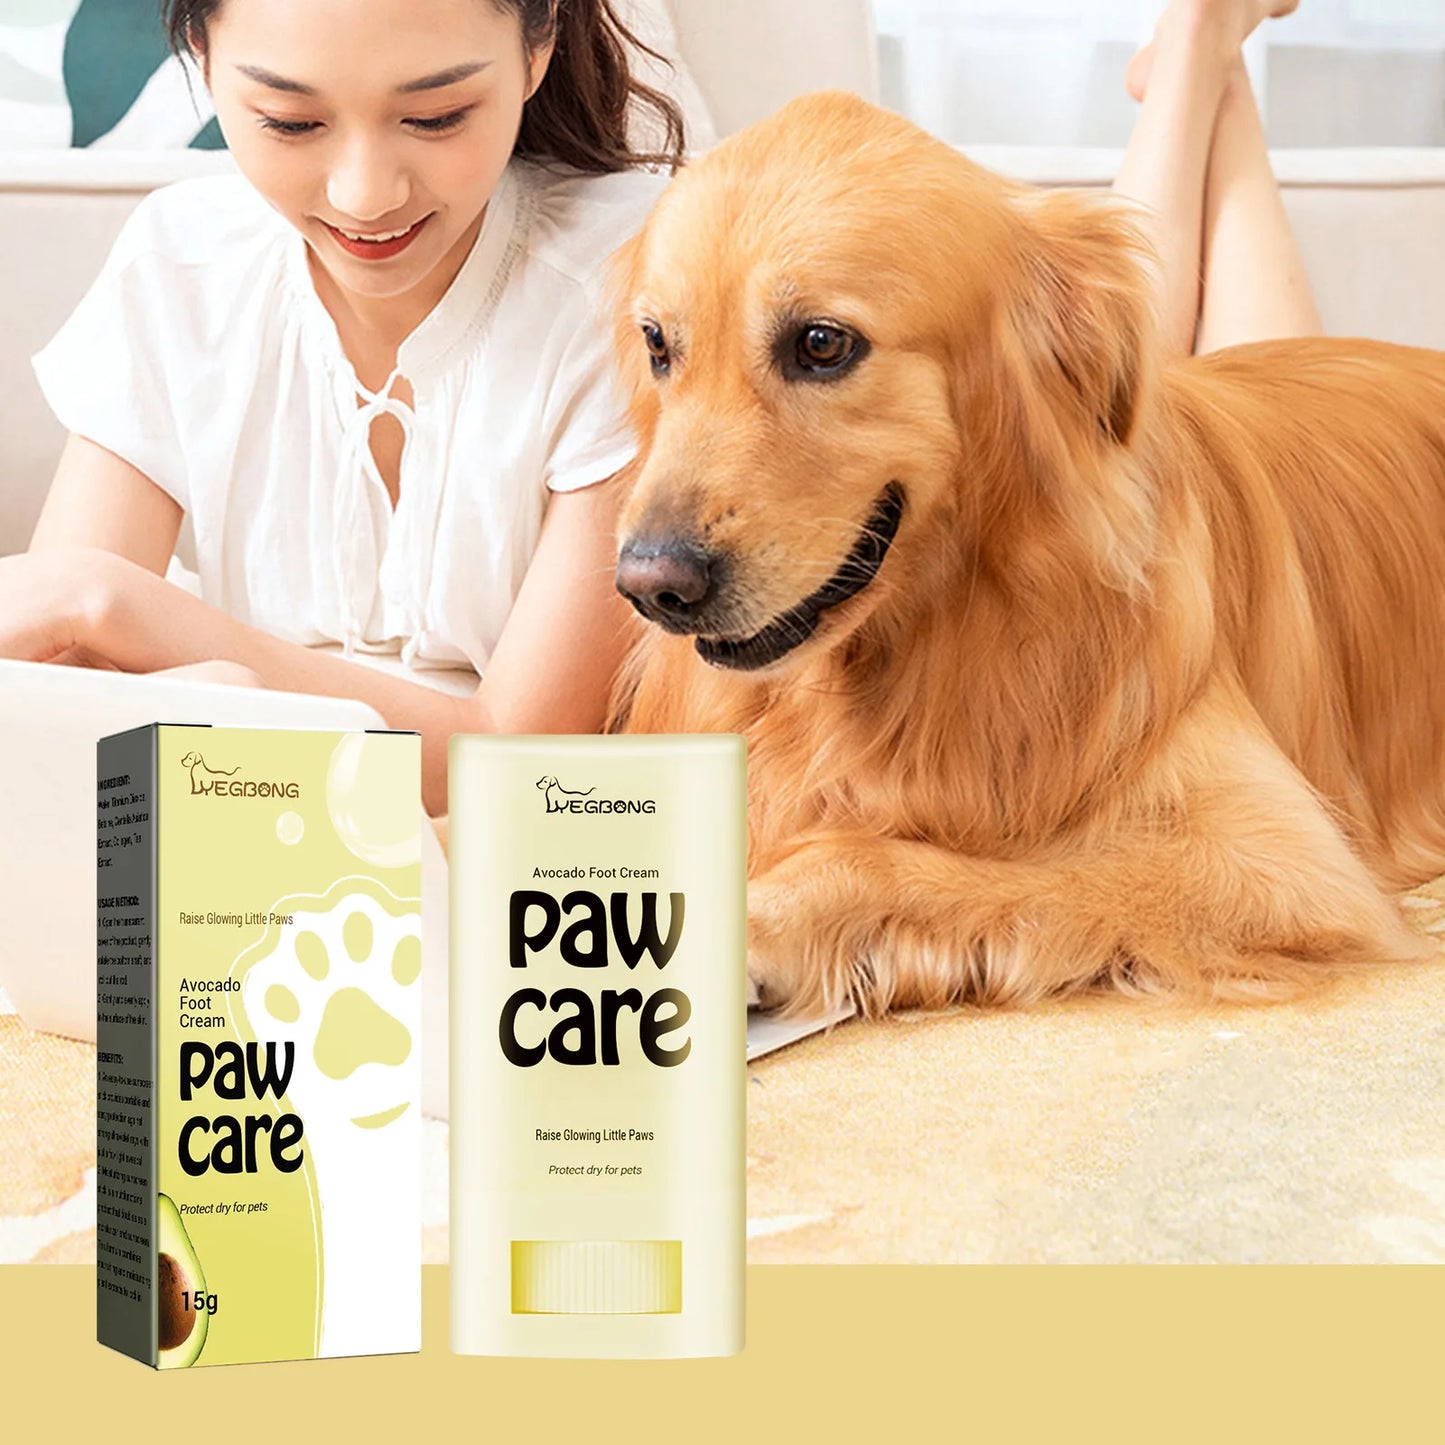 Dog Balm Paw Protector & Soother Moisturizer